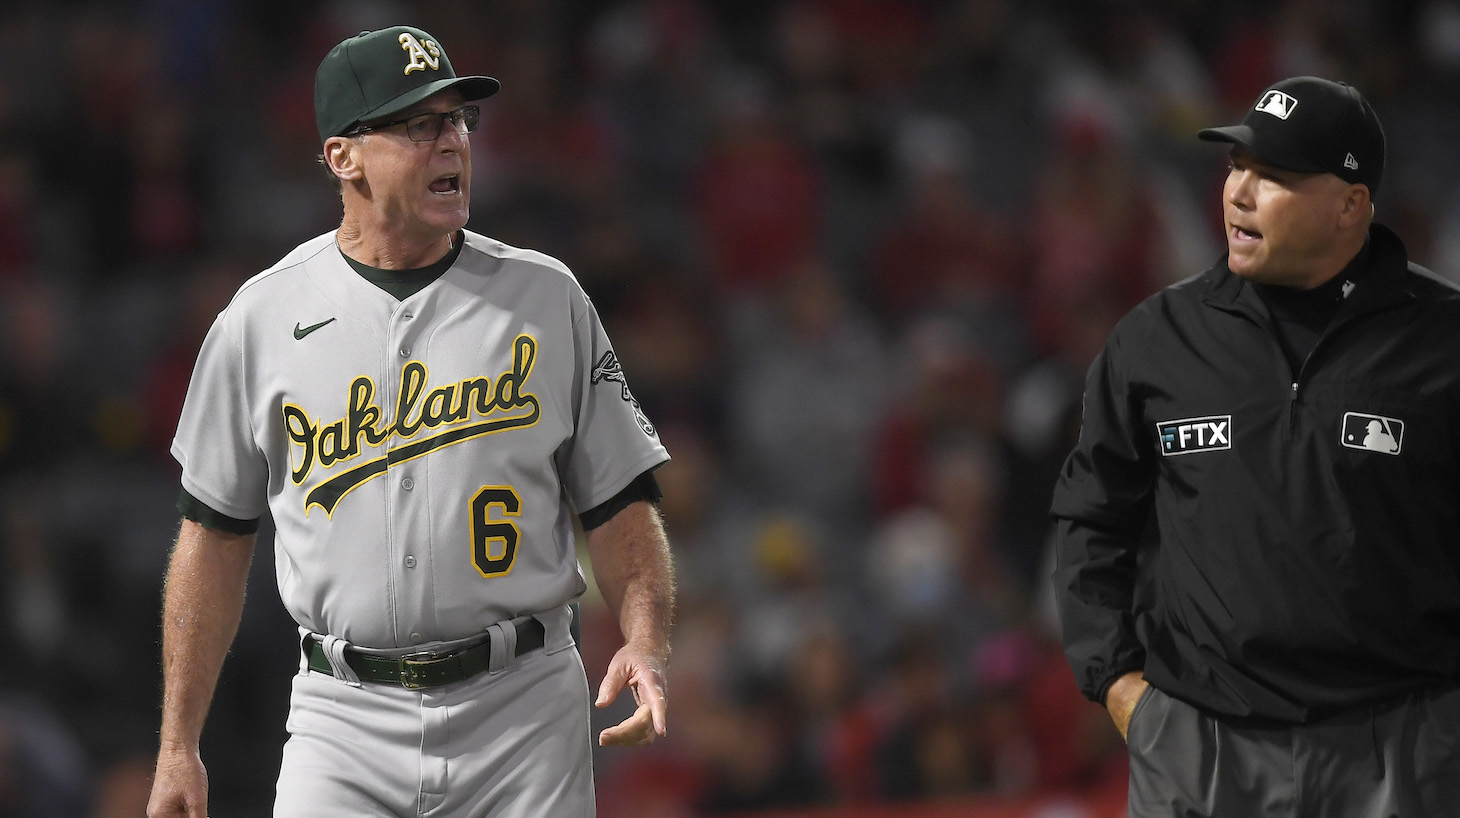 ANAHEIM, CA - SEPTEMBER 18: Manager Bob Melvin #6 of the Oakland Athletics argues with umpire Mark Carlson #6 after a call was reversed during the seventh inning against Los Angeles Angels at Angel Stadium of Anaheim on September 18, 2021 in Anaheim, California. (Photo by Kevork Djansezian/Getty Images)